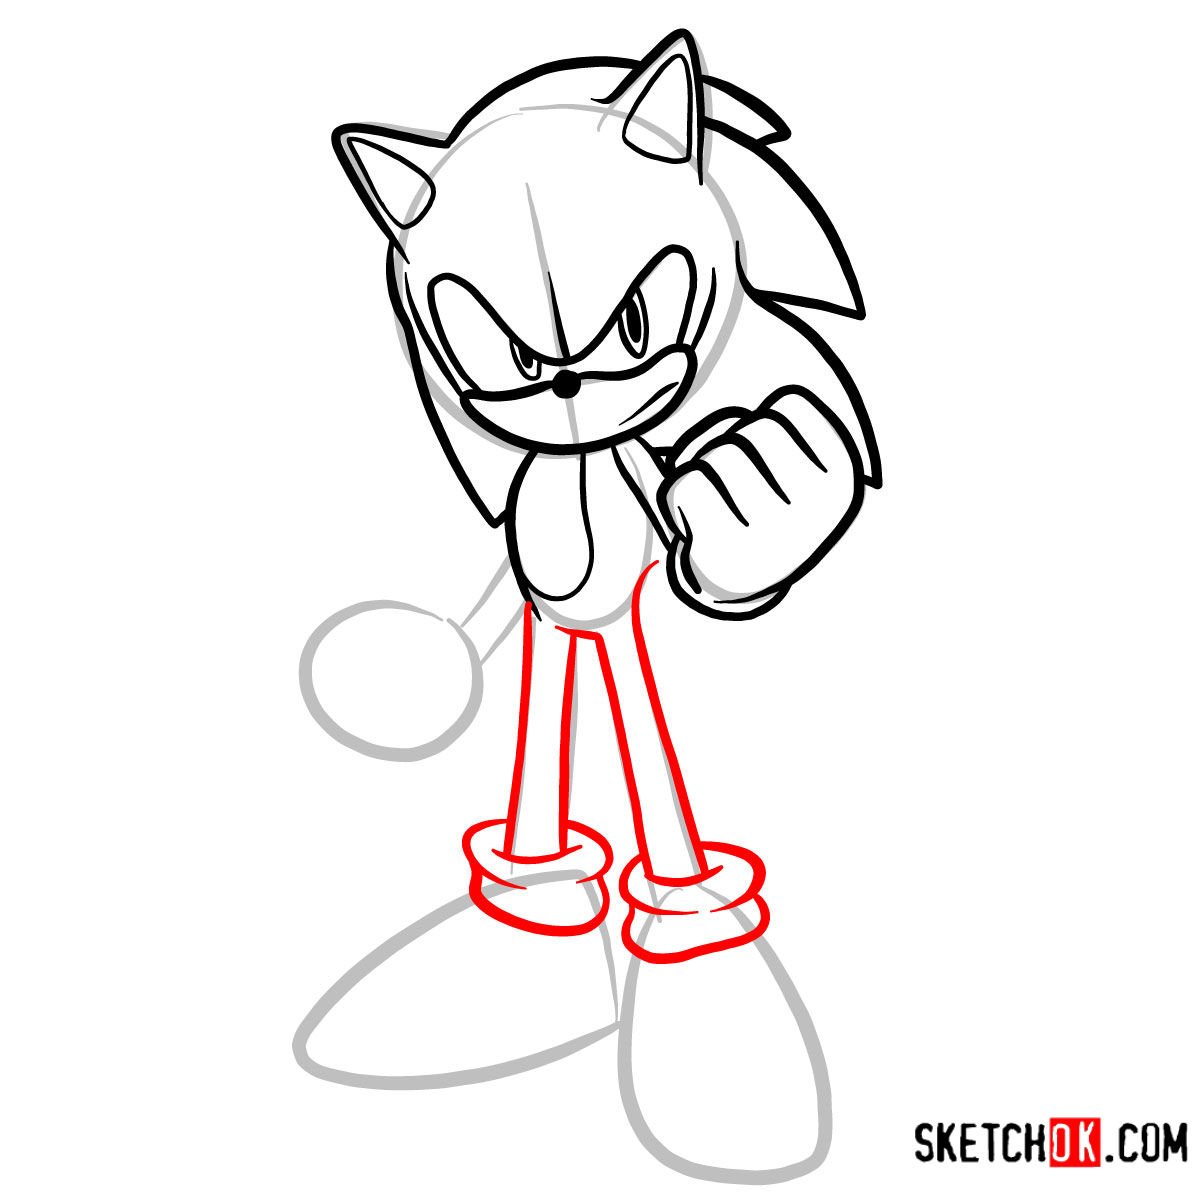 How to draw Sonic the Hedgehog - step 07